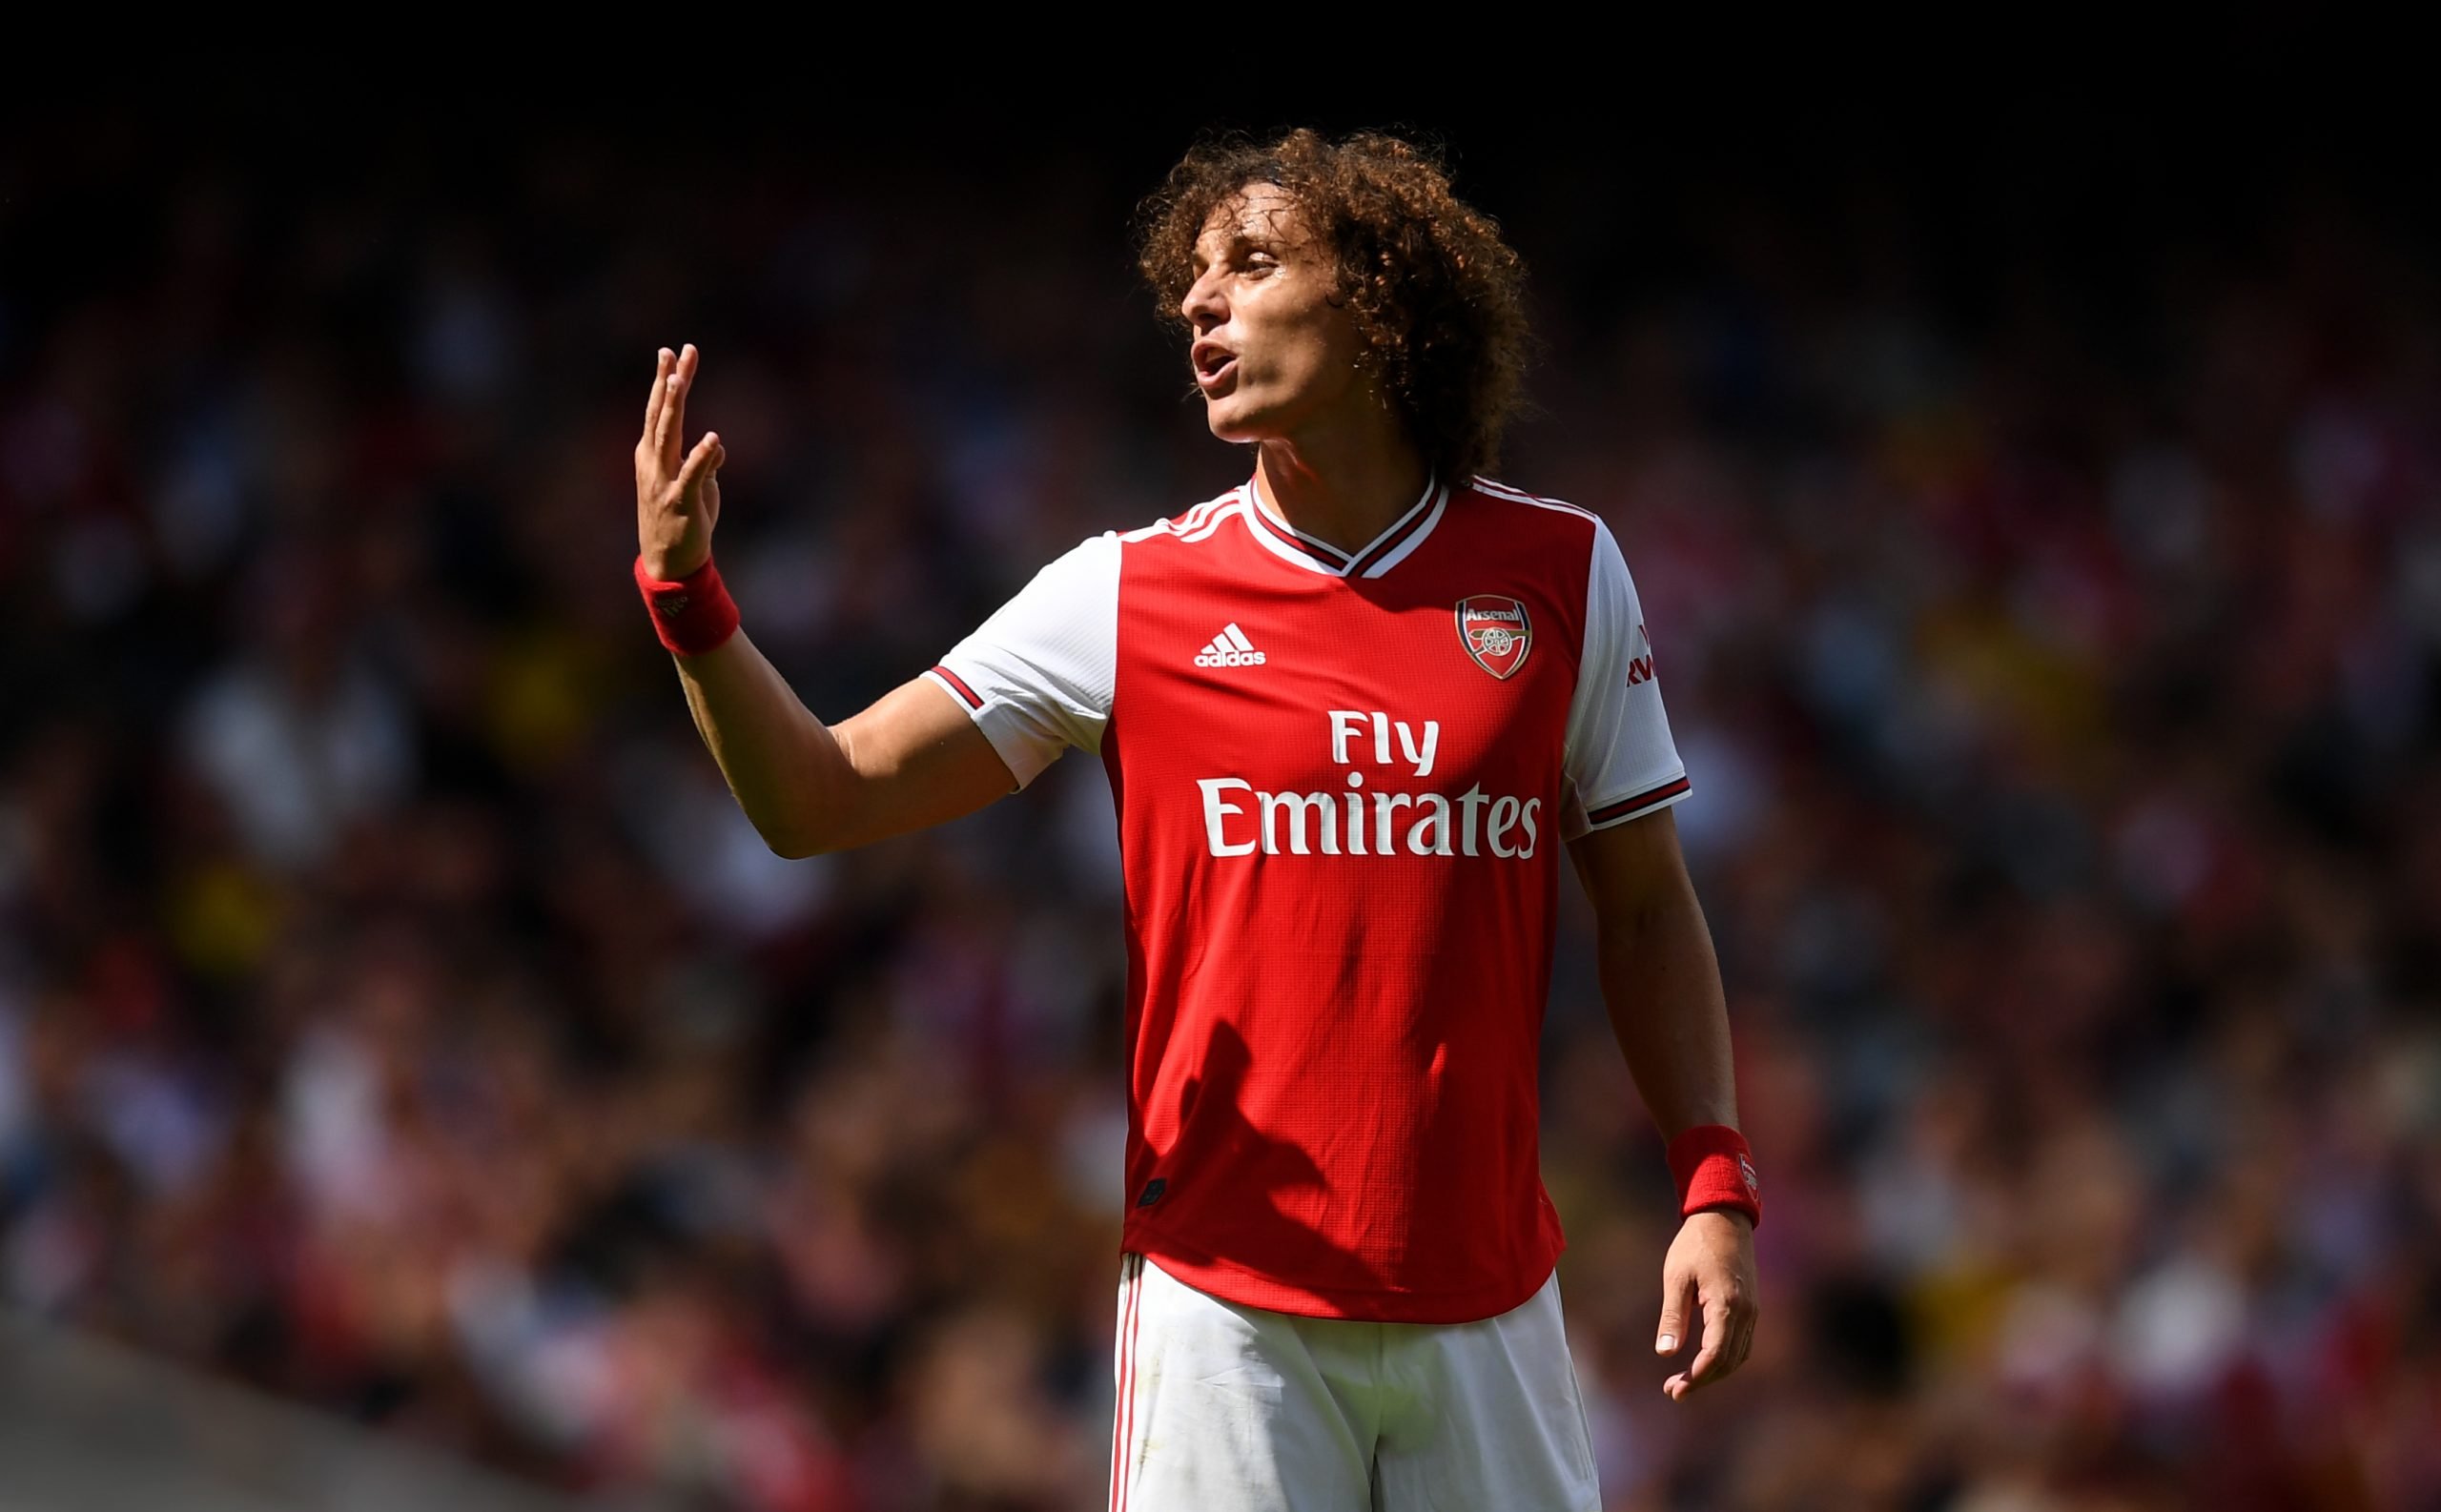 LONDON, ENGLAND - AUGUST 17: David Luiz of Arsenal looks on during the Premier League match between Arsenal FC and Burnley FC at Emirates Stadium on August 17, 2019 in London, United Kingdom. (Photo by Michael Regan/Getty Images)